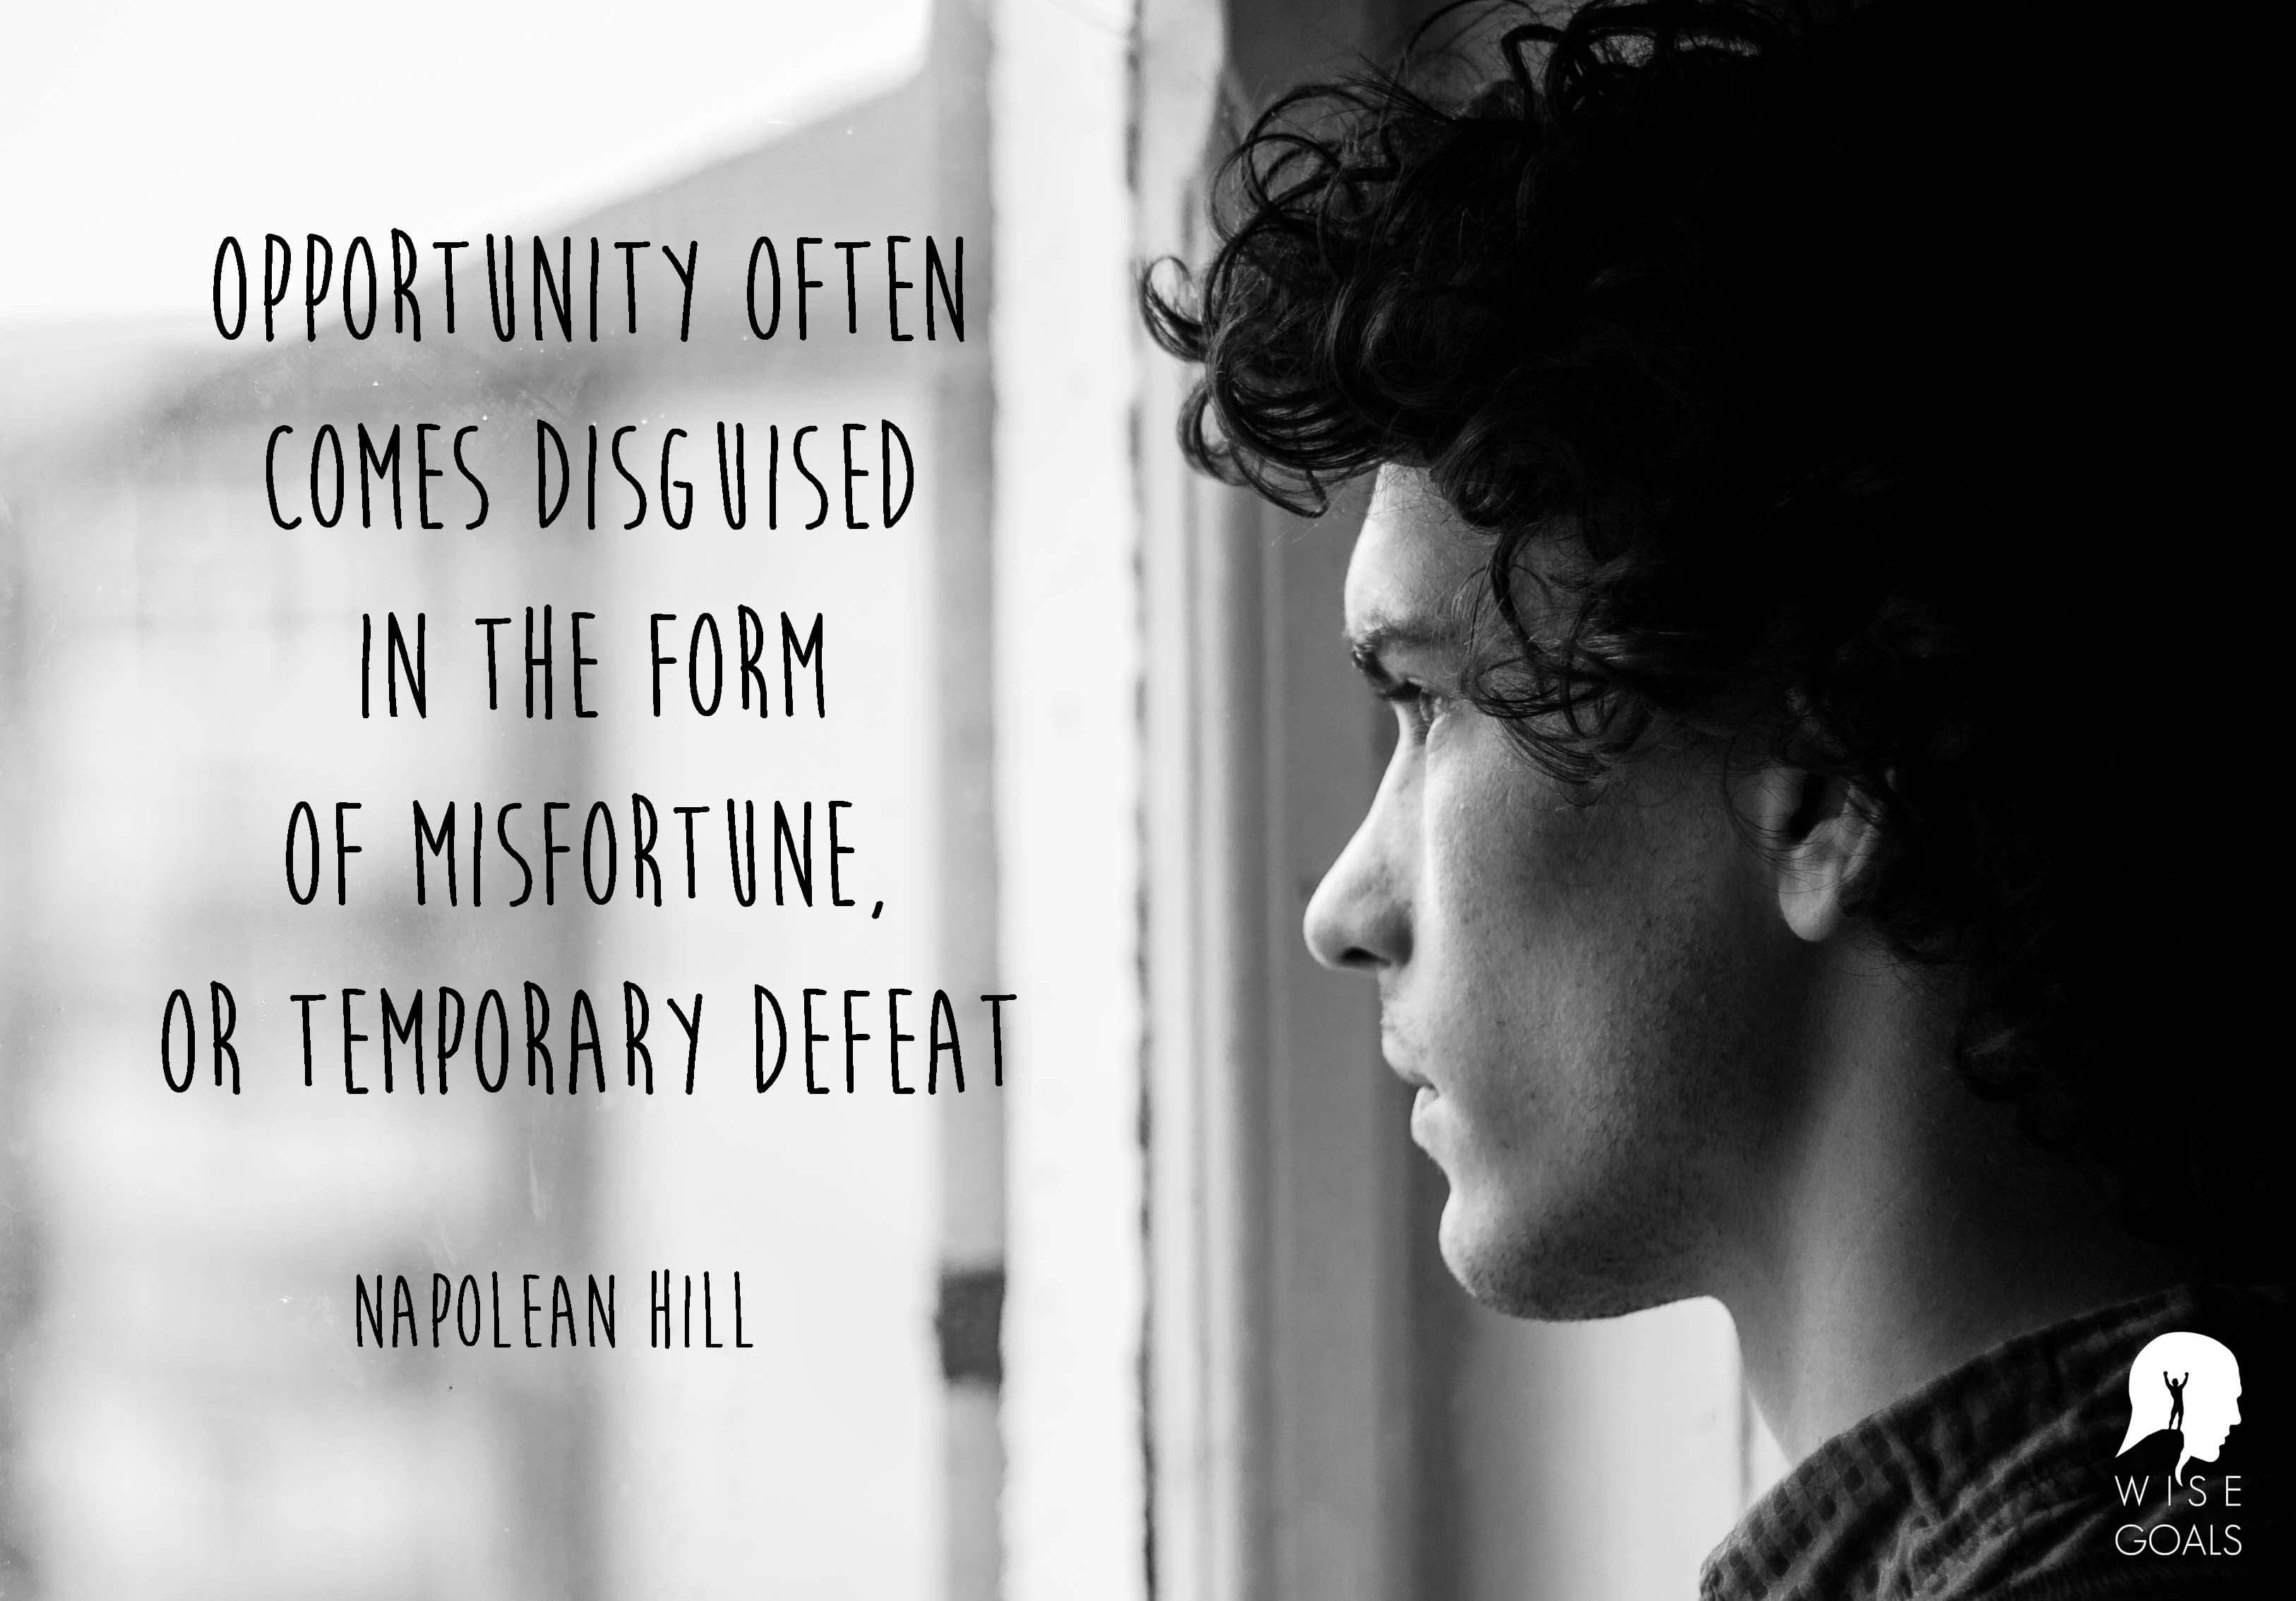 Hill - Opportunity often comes disguised in the form of misfortune, or temporary defeat quote 